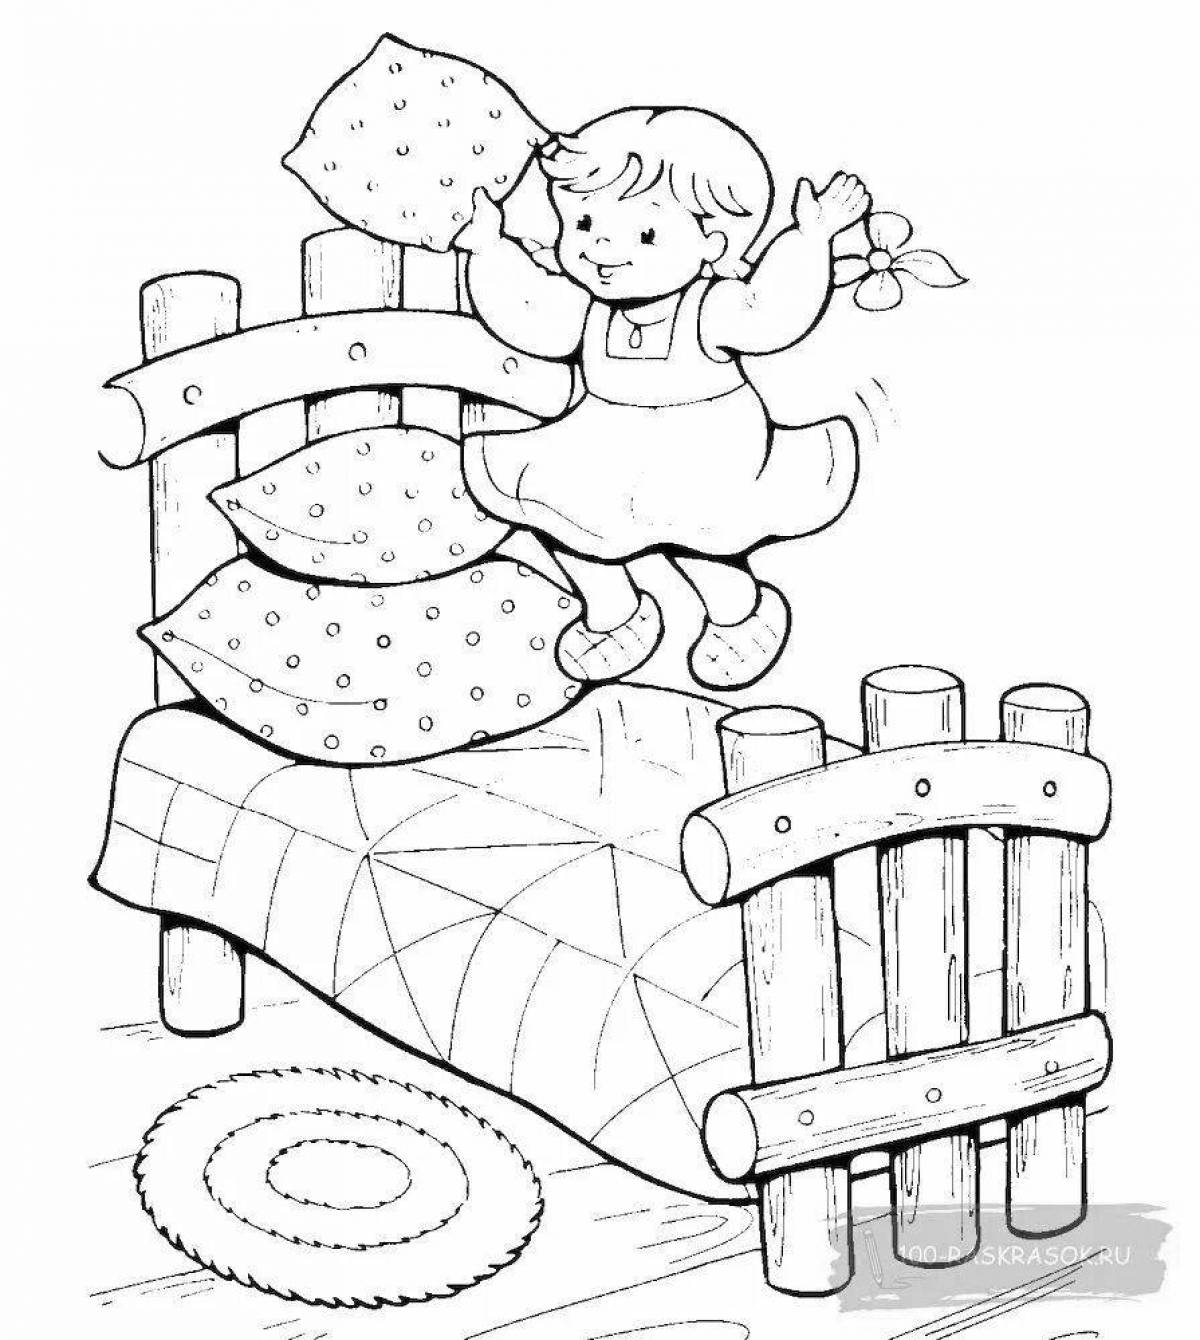 Adorable 3 bears coloring book for kids